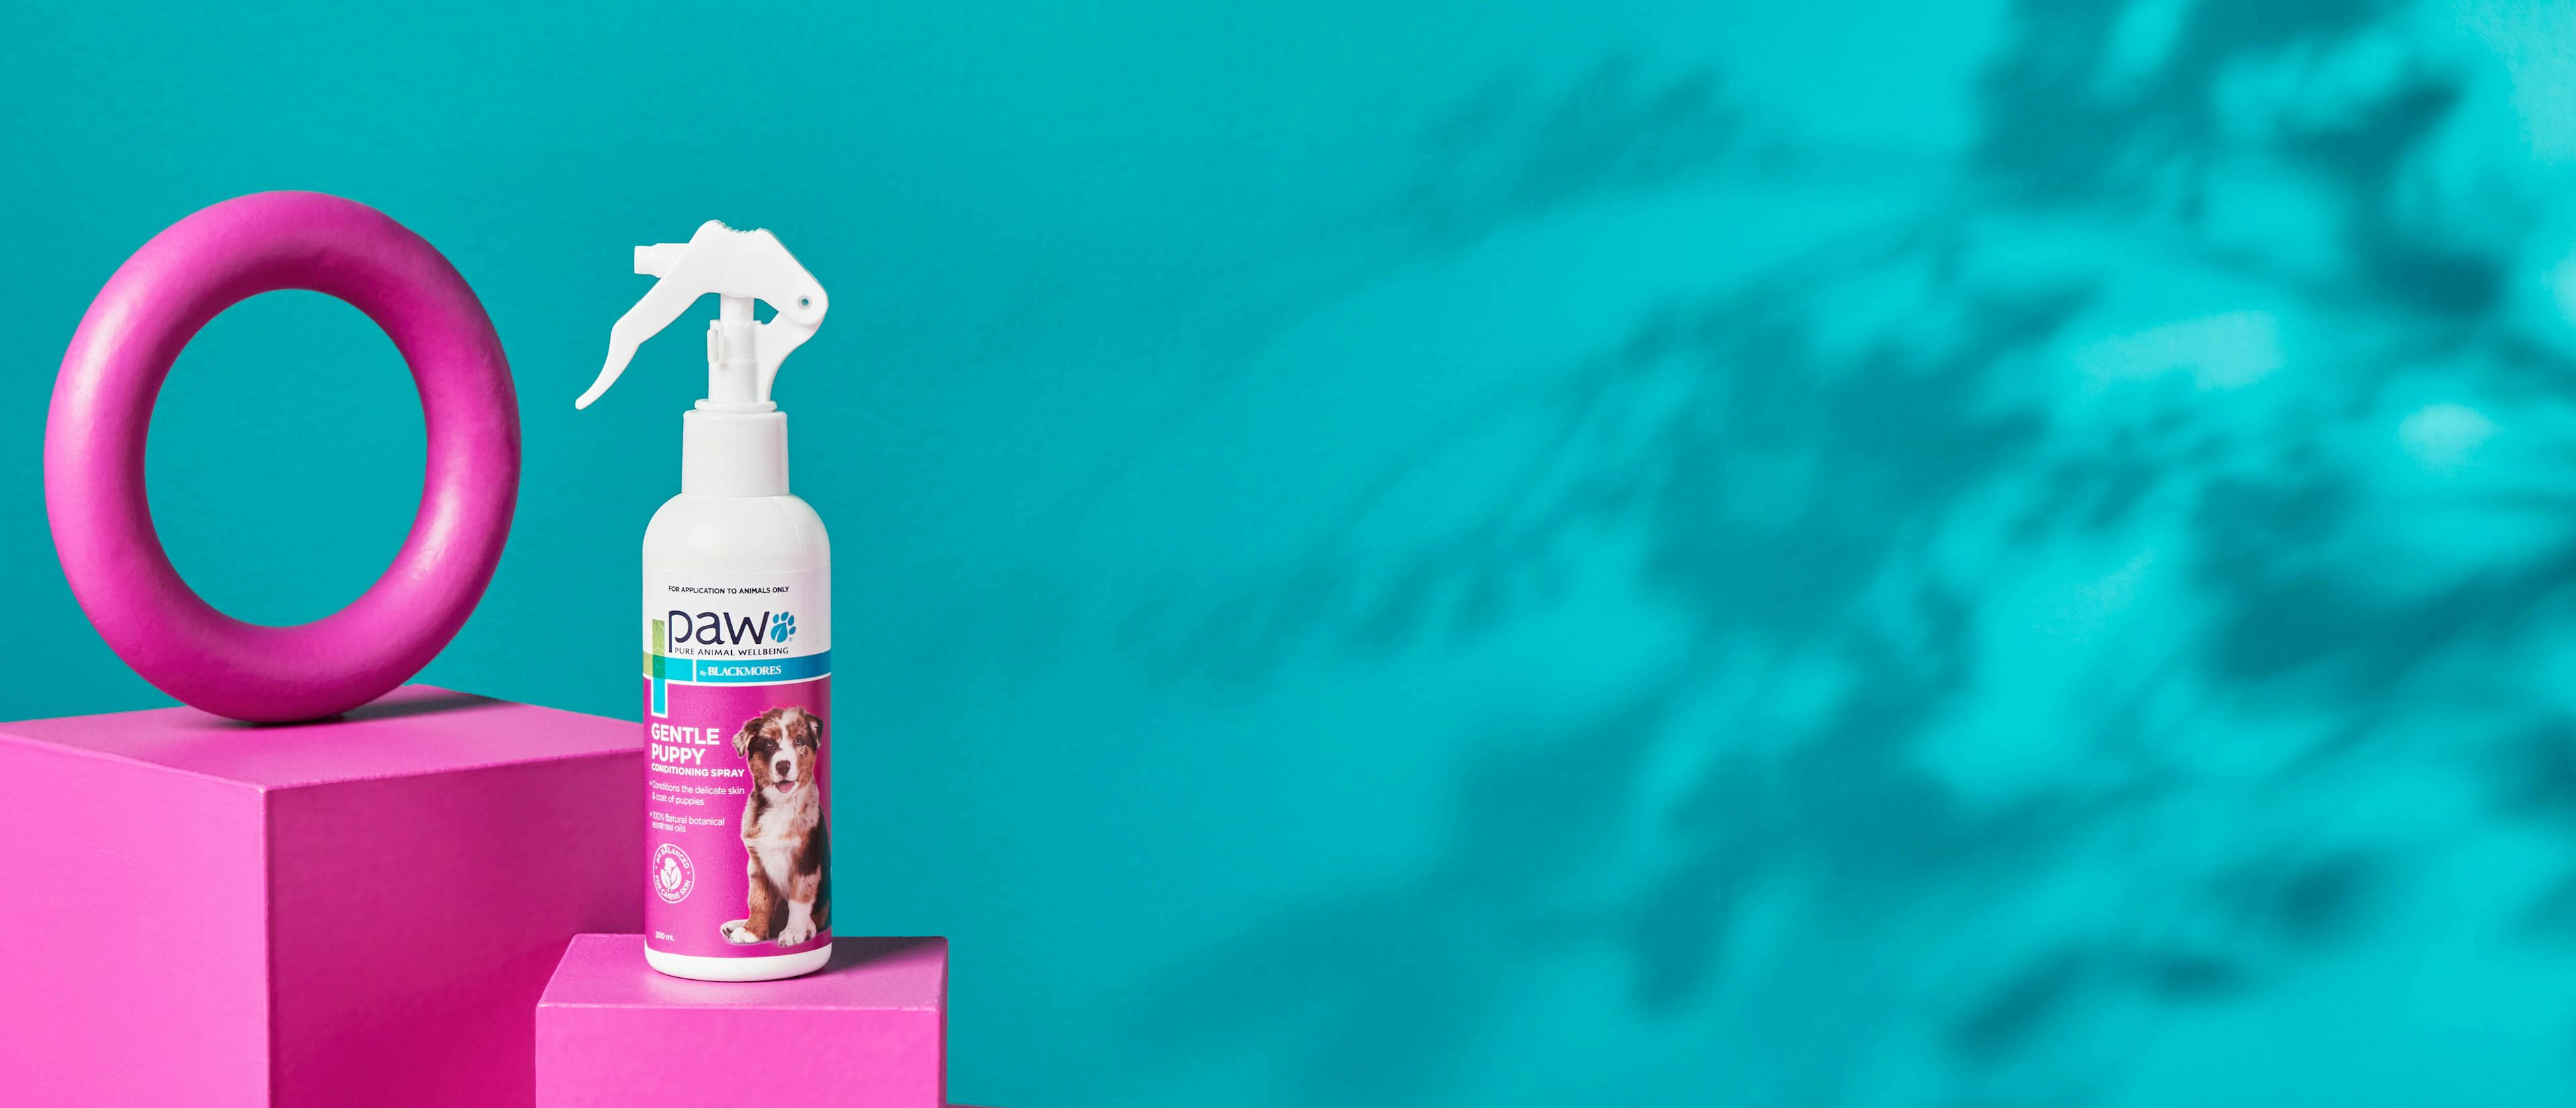 PAW-Puppy-Conditioner-Spray-Product-pg-banner_5064x2179 (1)